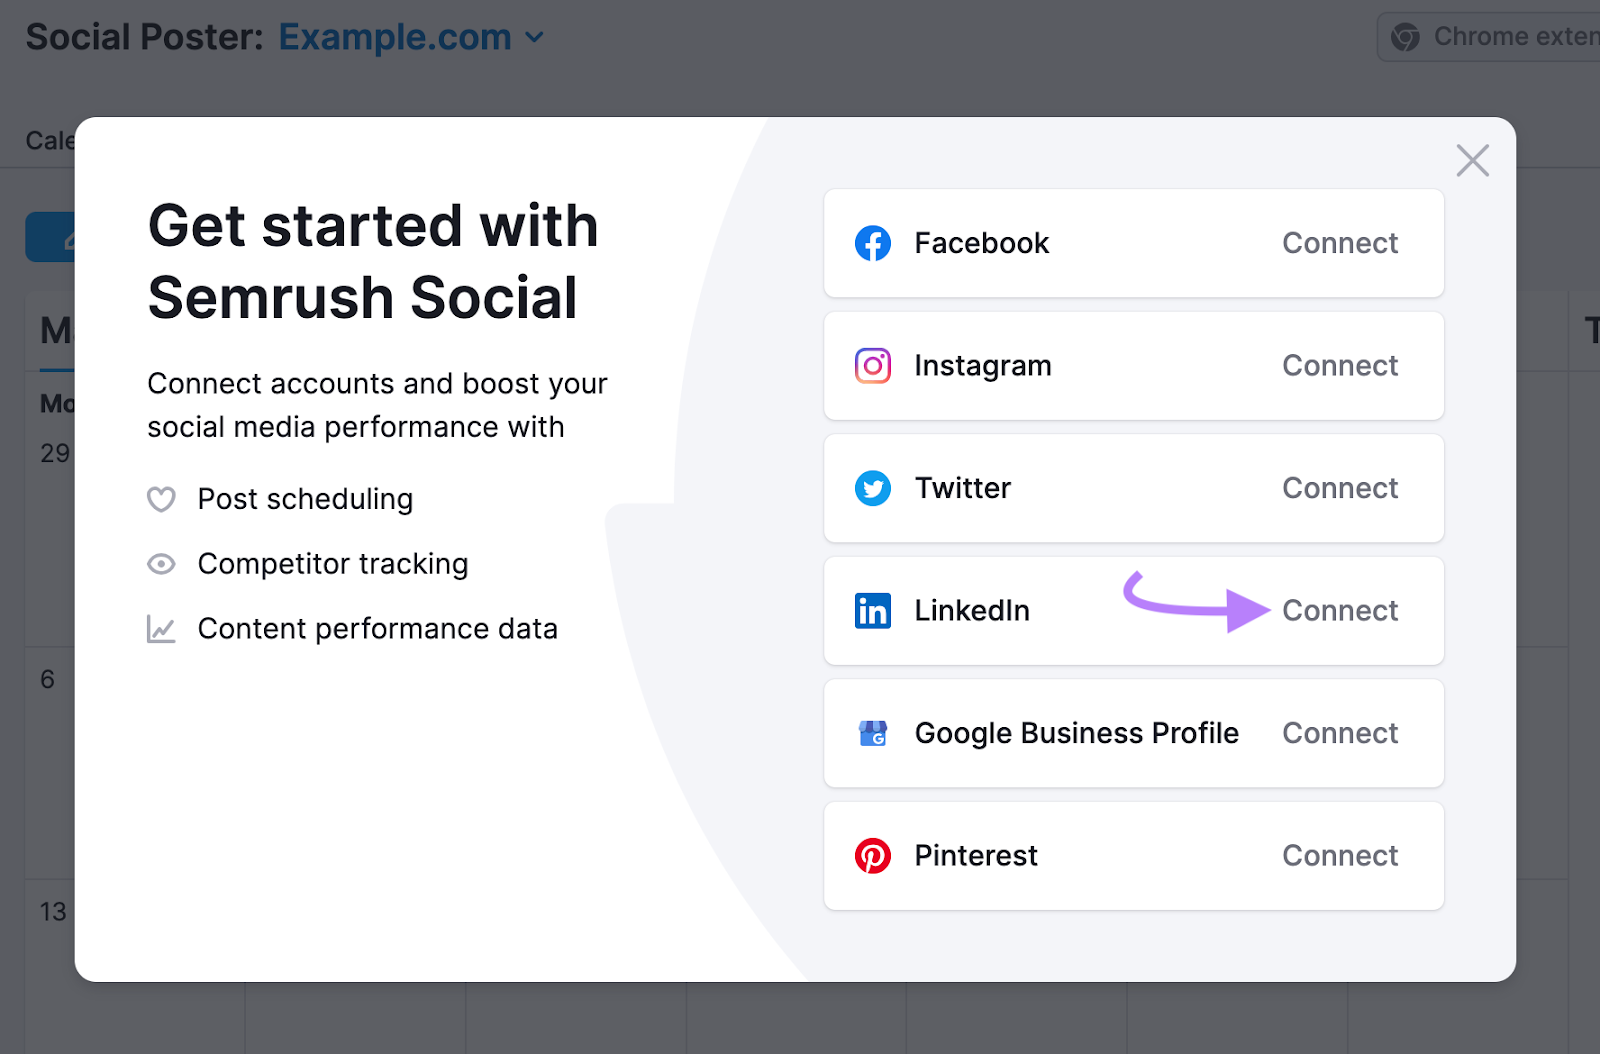 Semrush social start screen with LinkedIn connect button highlighted